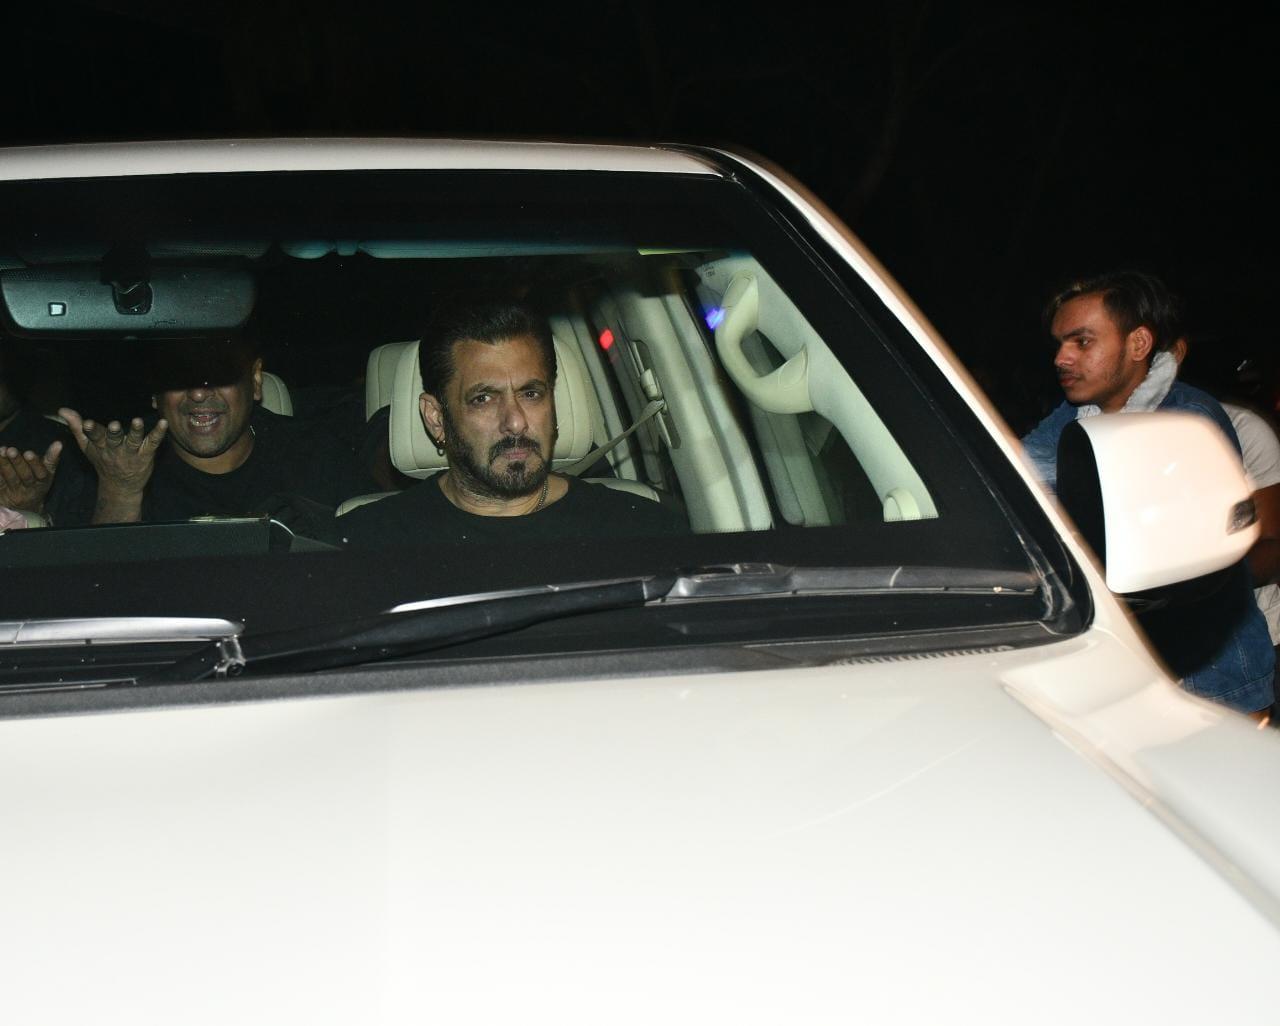 Salman Khan who plays a cameo in Pathaan was also seen at the screening hosted by YRF on Wednesday night. Khan reprised the role of Tiger for the film. In the film, SRK's Pathaan also confirmed that he will be appearing in Tiger 3 which will be released later this year